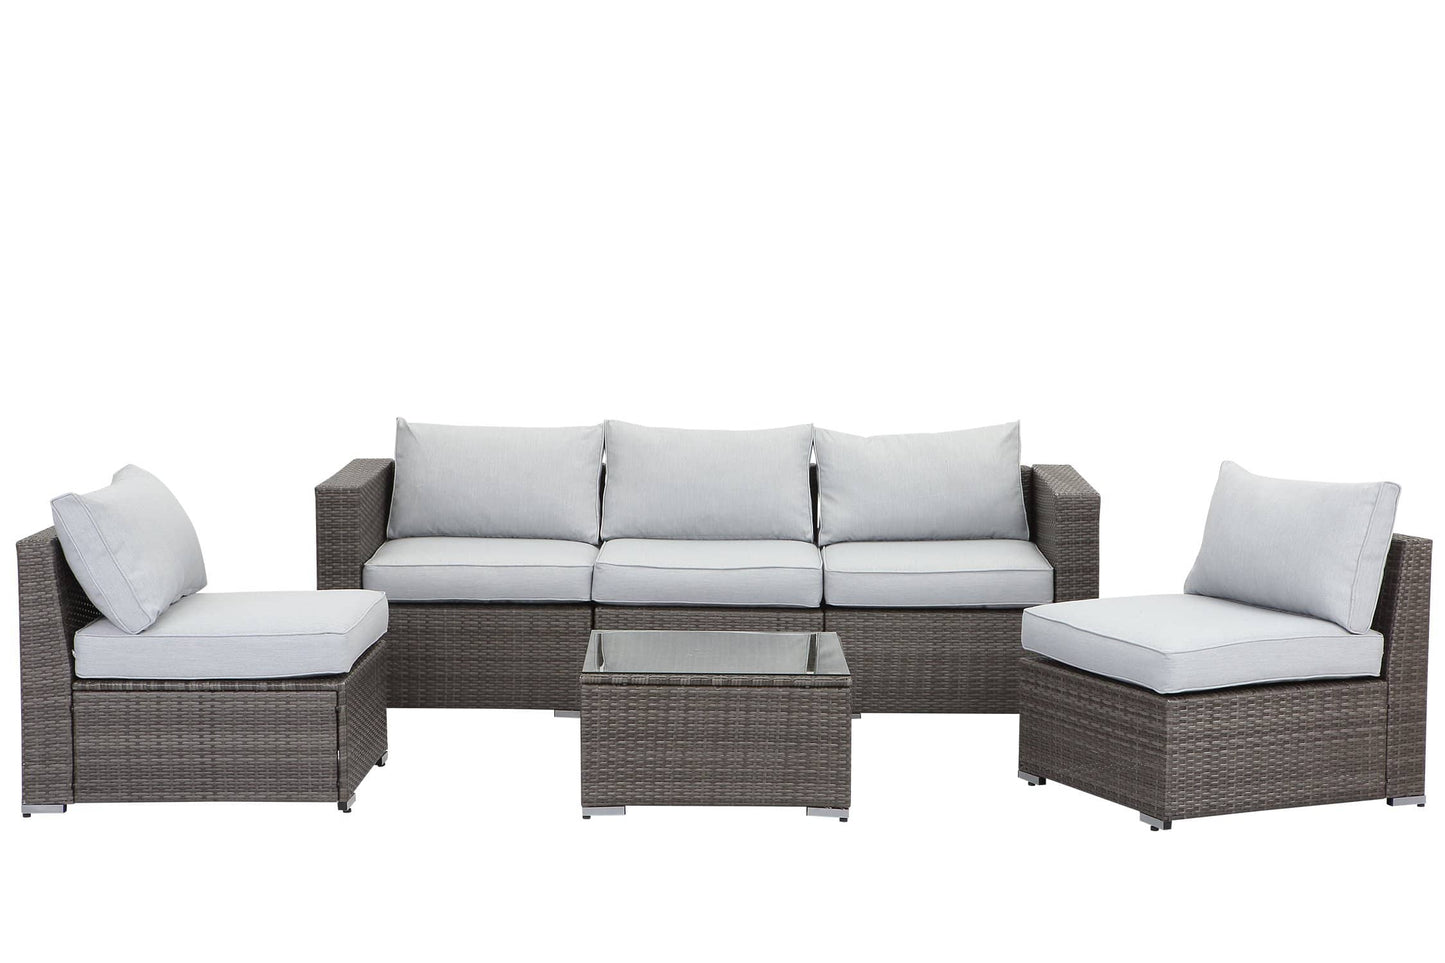 Staffora Evoke 6 Piece All Weather Wicker Sofa Seating Group with Cushions and Coffee Table - Grey